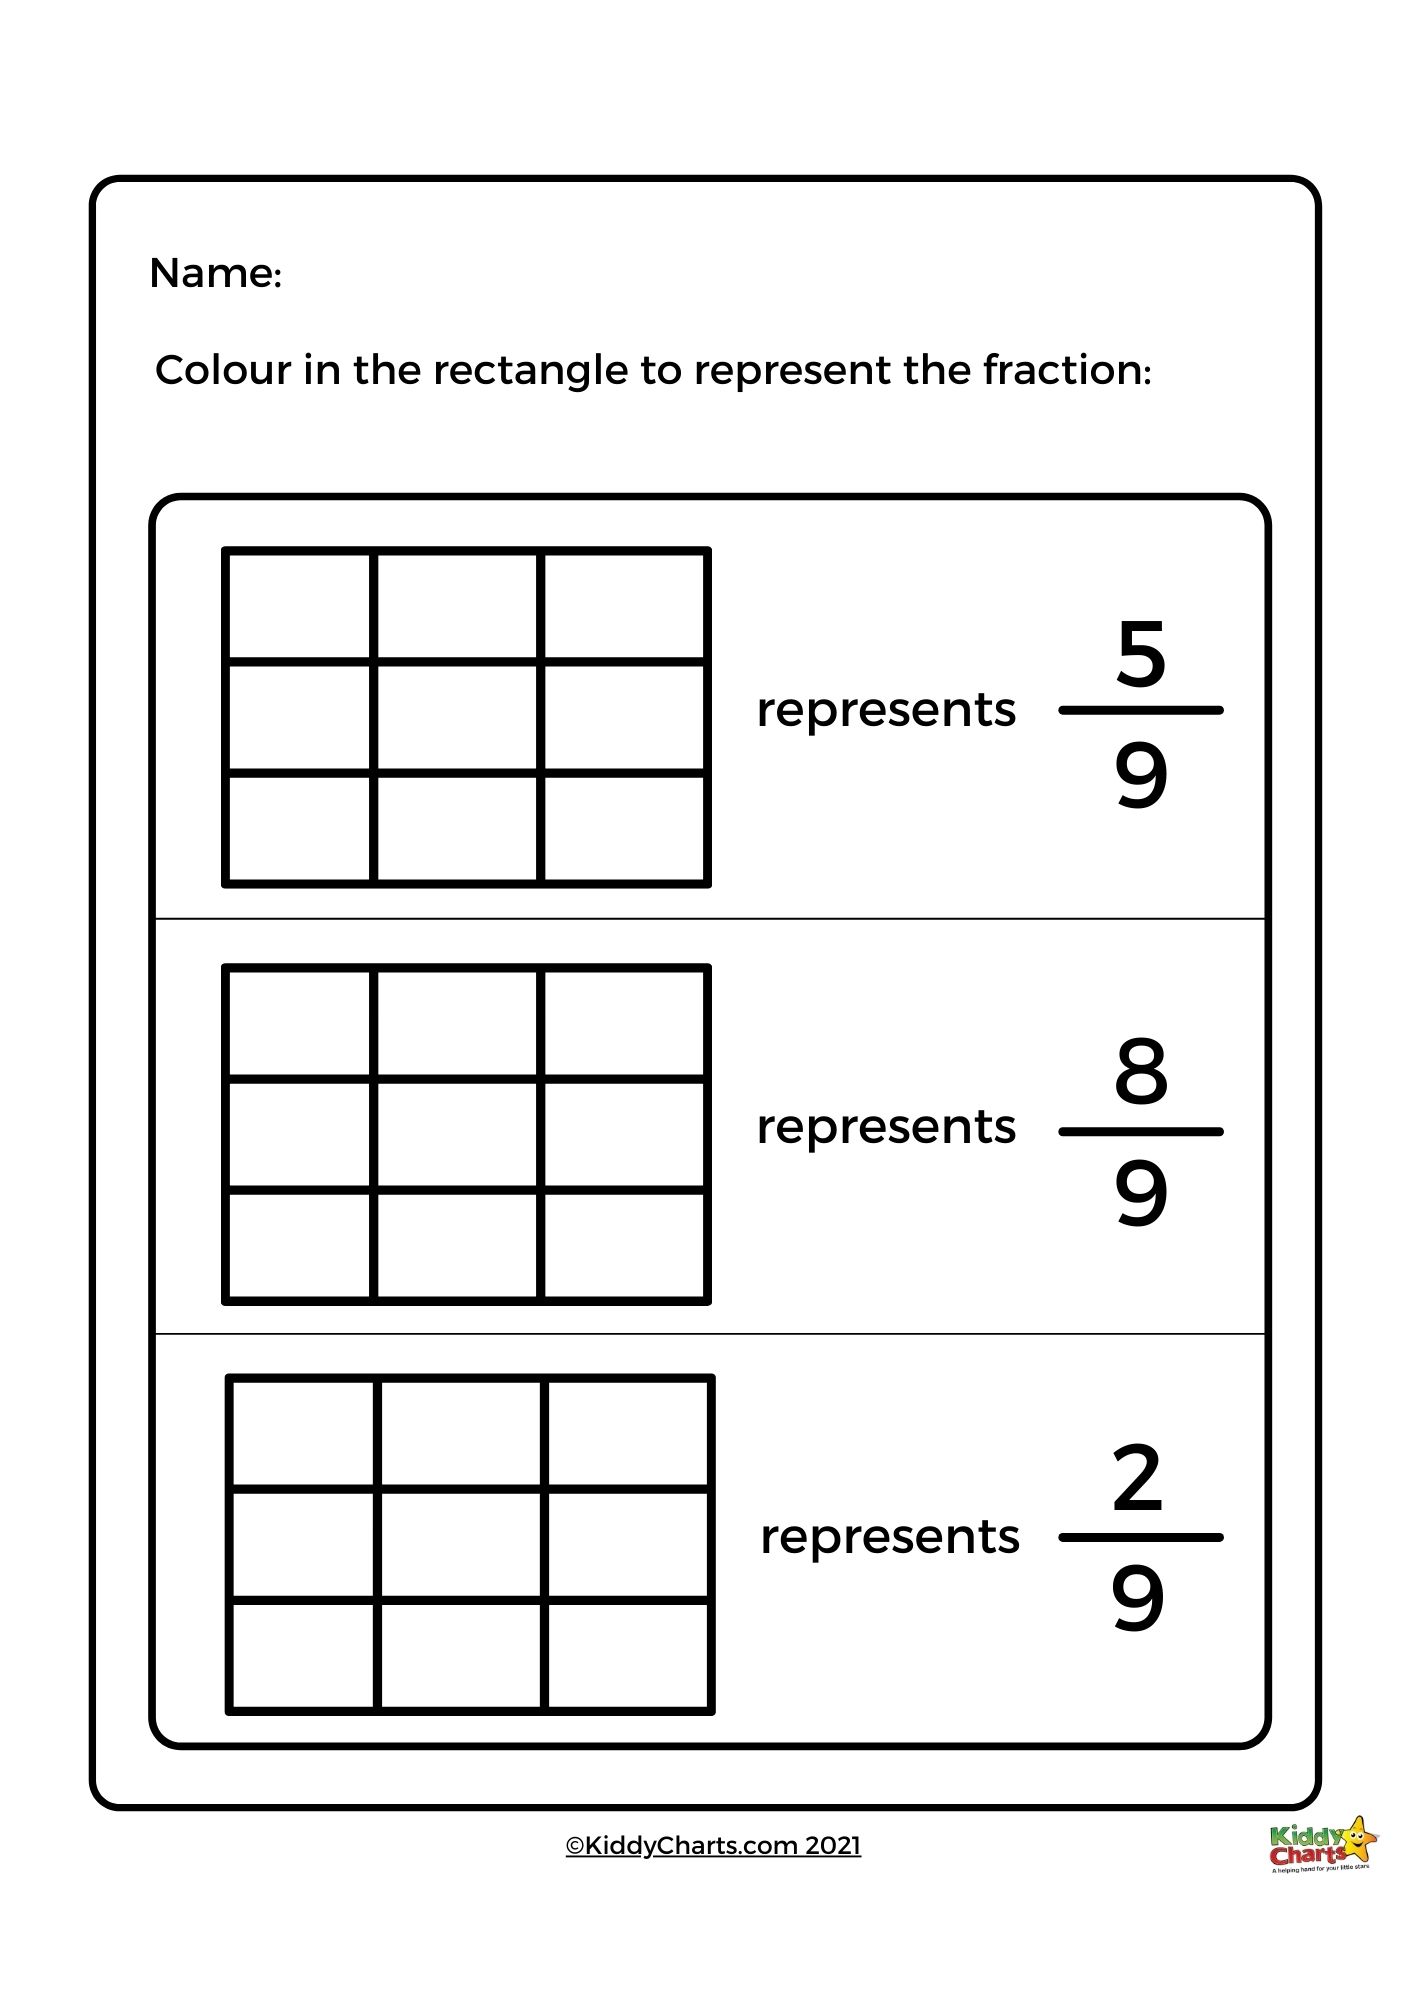 my homework lesson 4 equivalent fractions page 509 answer key